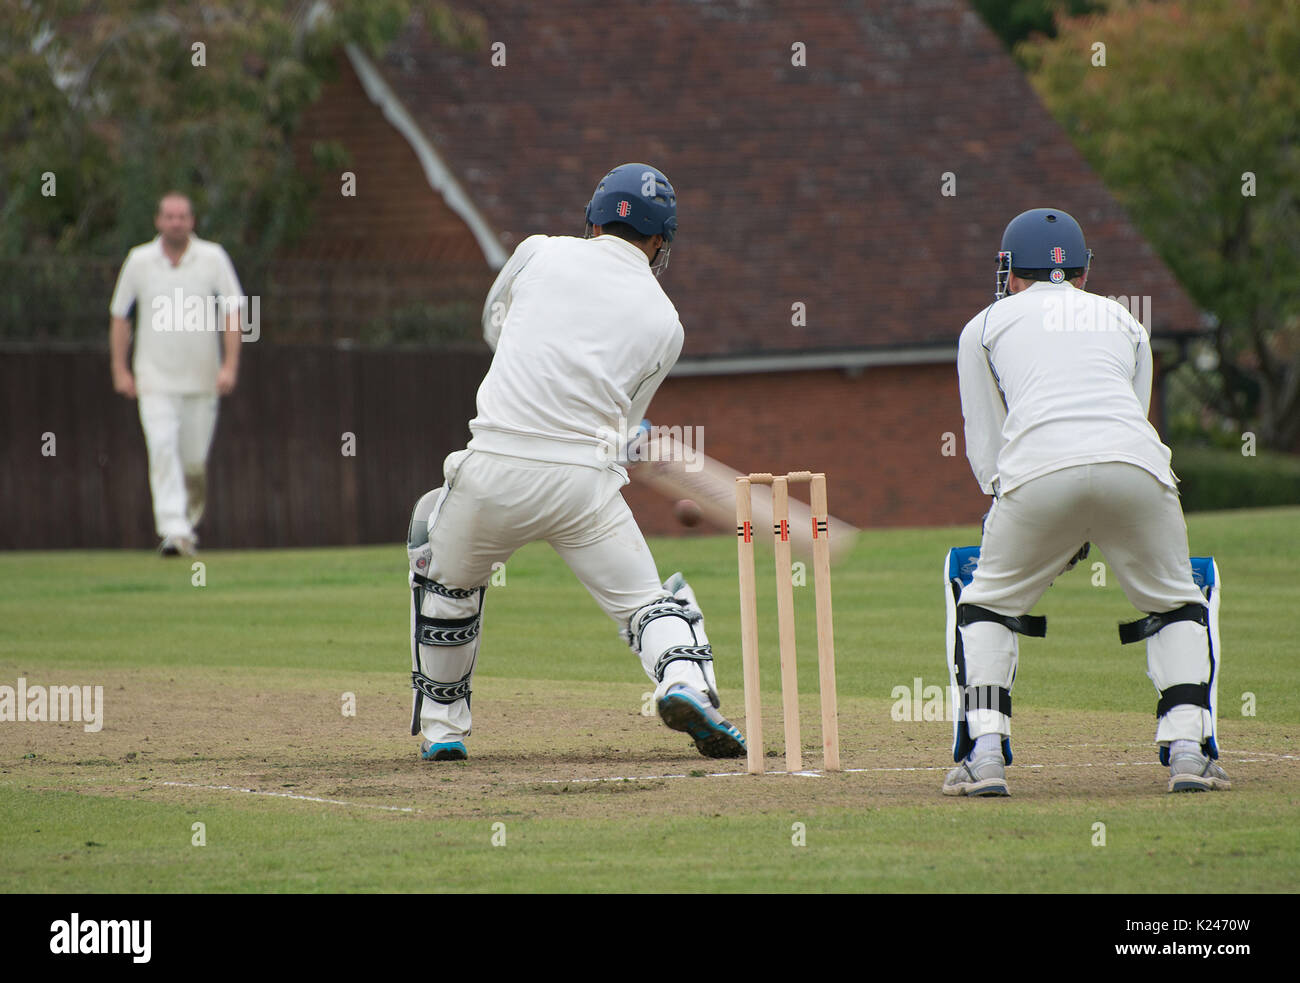 Village cricket match viewed from behind stumps with batsman playing a stroke and wicket keeper ready and with the ball clearly seen Stock Photo